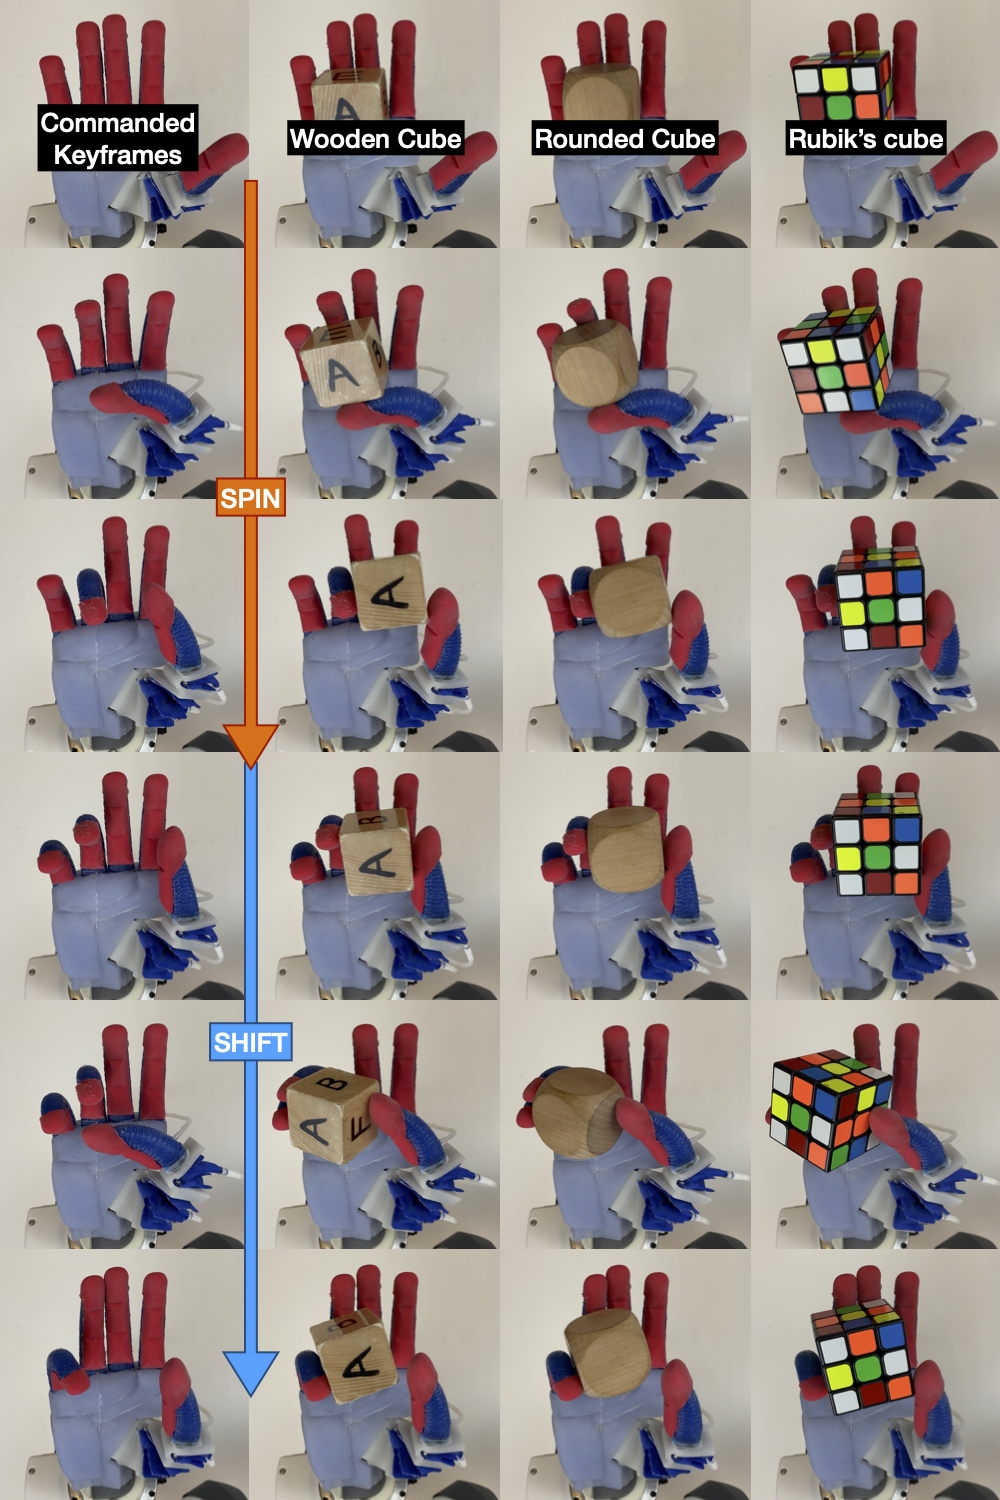 From roughly similar initial placements, simply replaying these keyframe sequences onto the hand places the cube in consistently similar outcome positions. This also transferred across differently sized cubes!